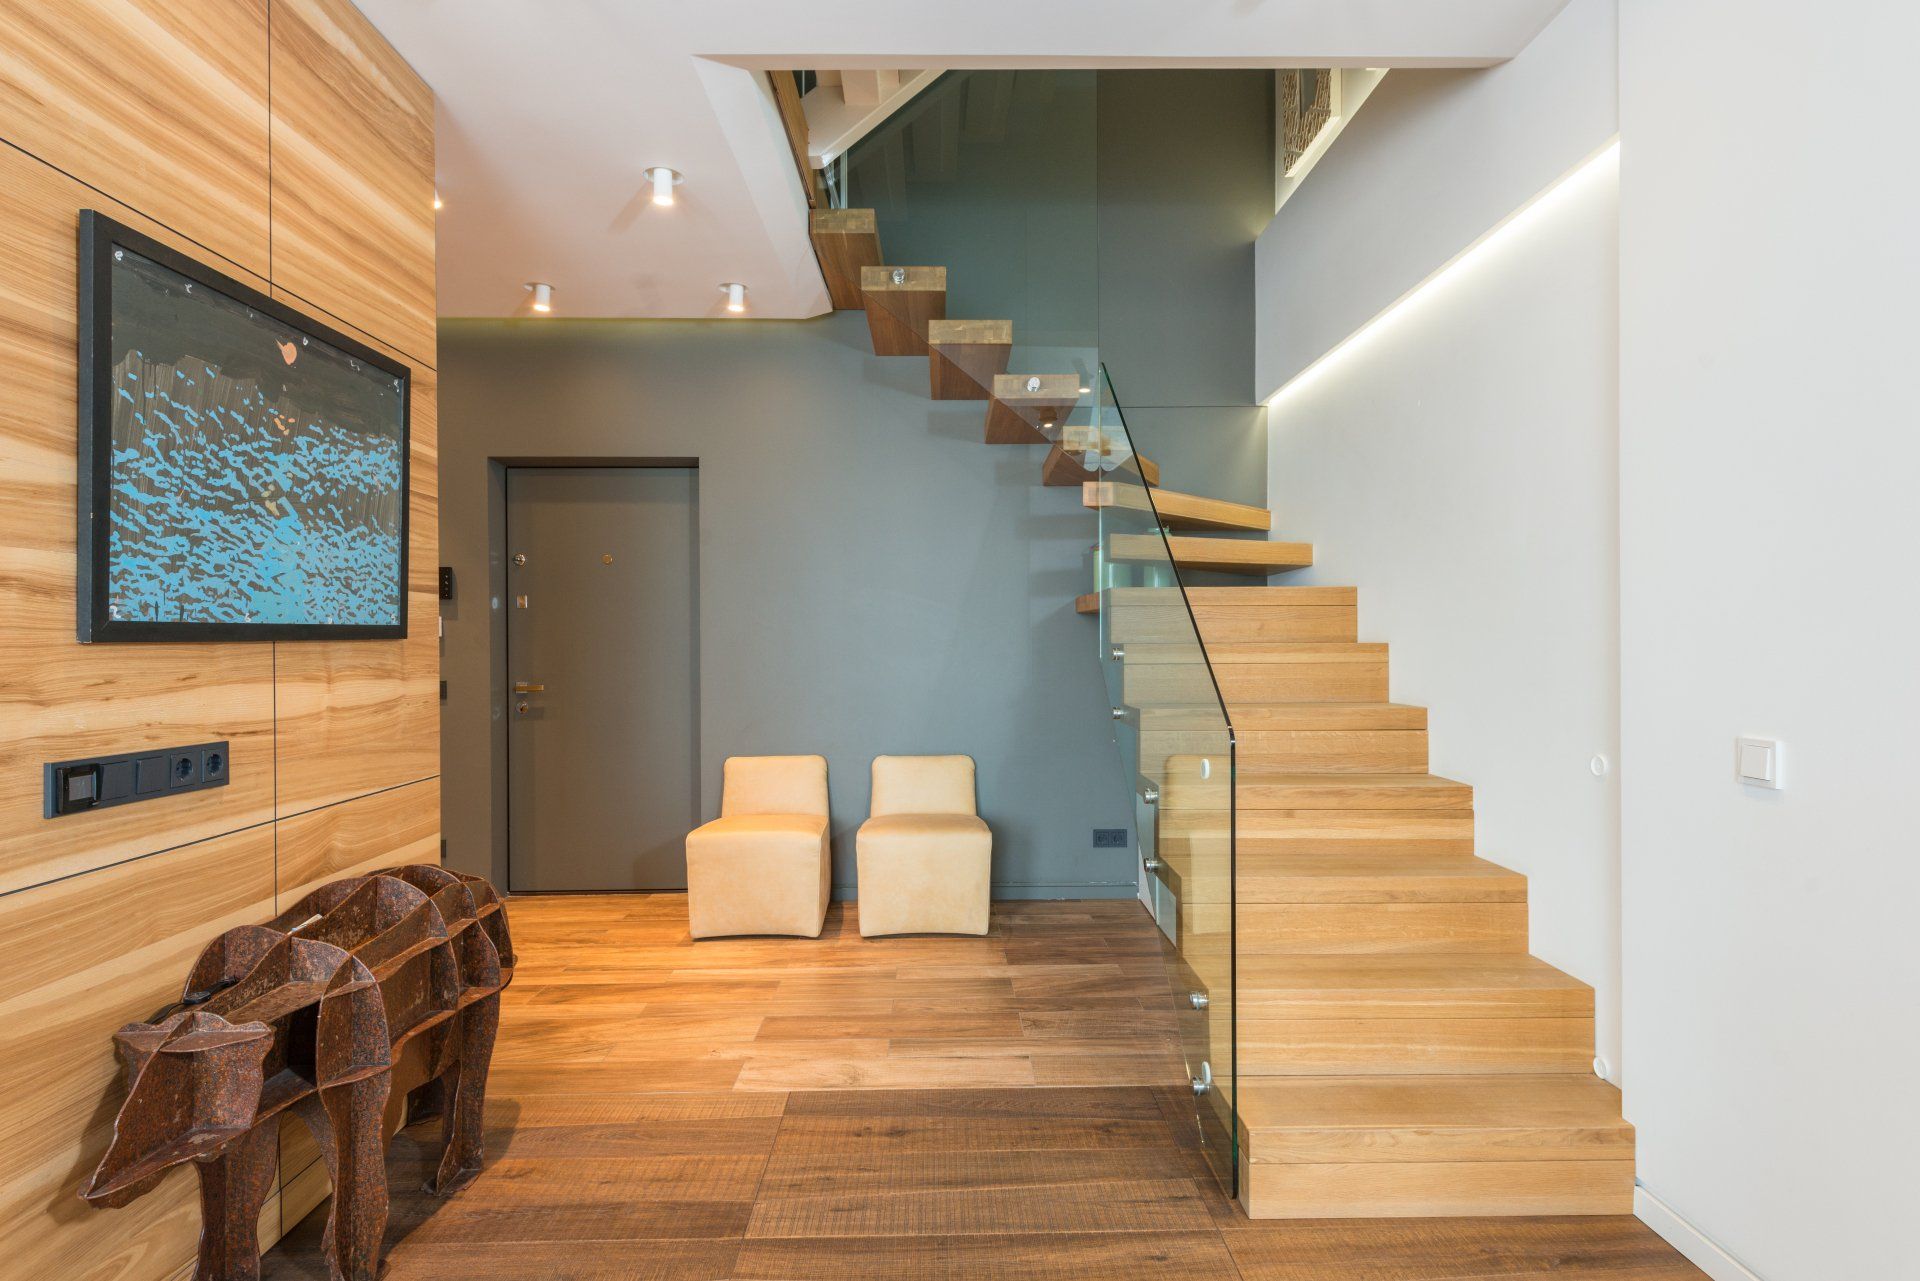 A wooden staircase with a glass railing and a flat screen tv on the wall.